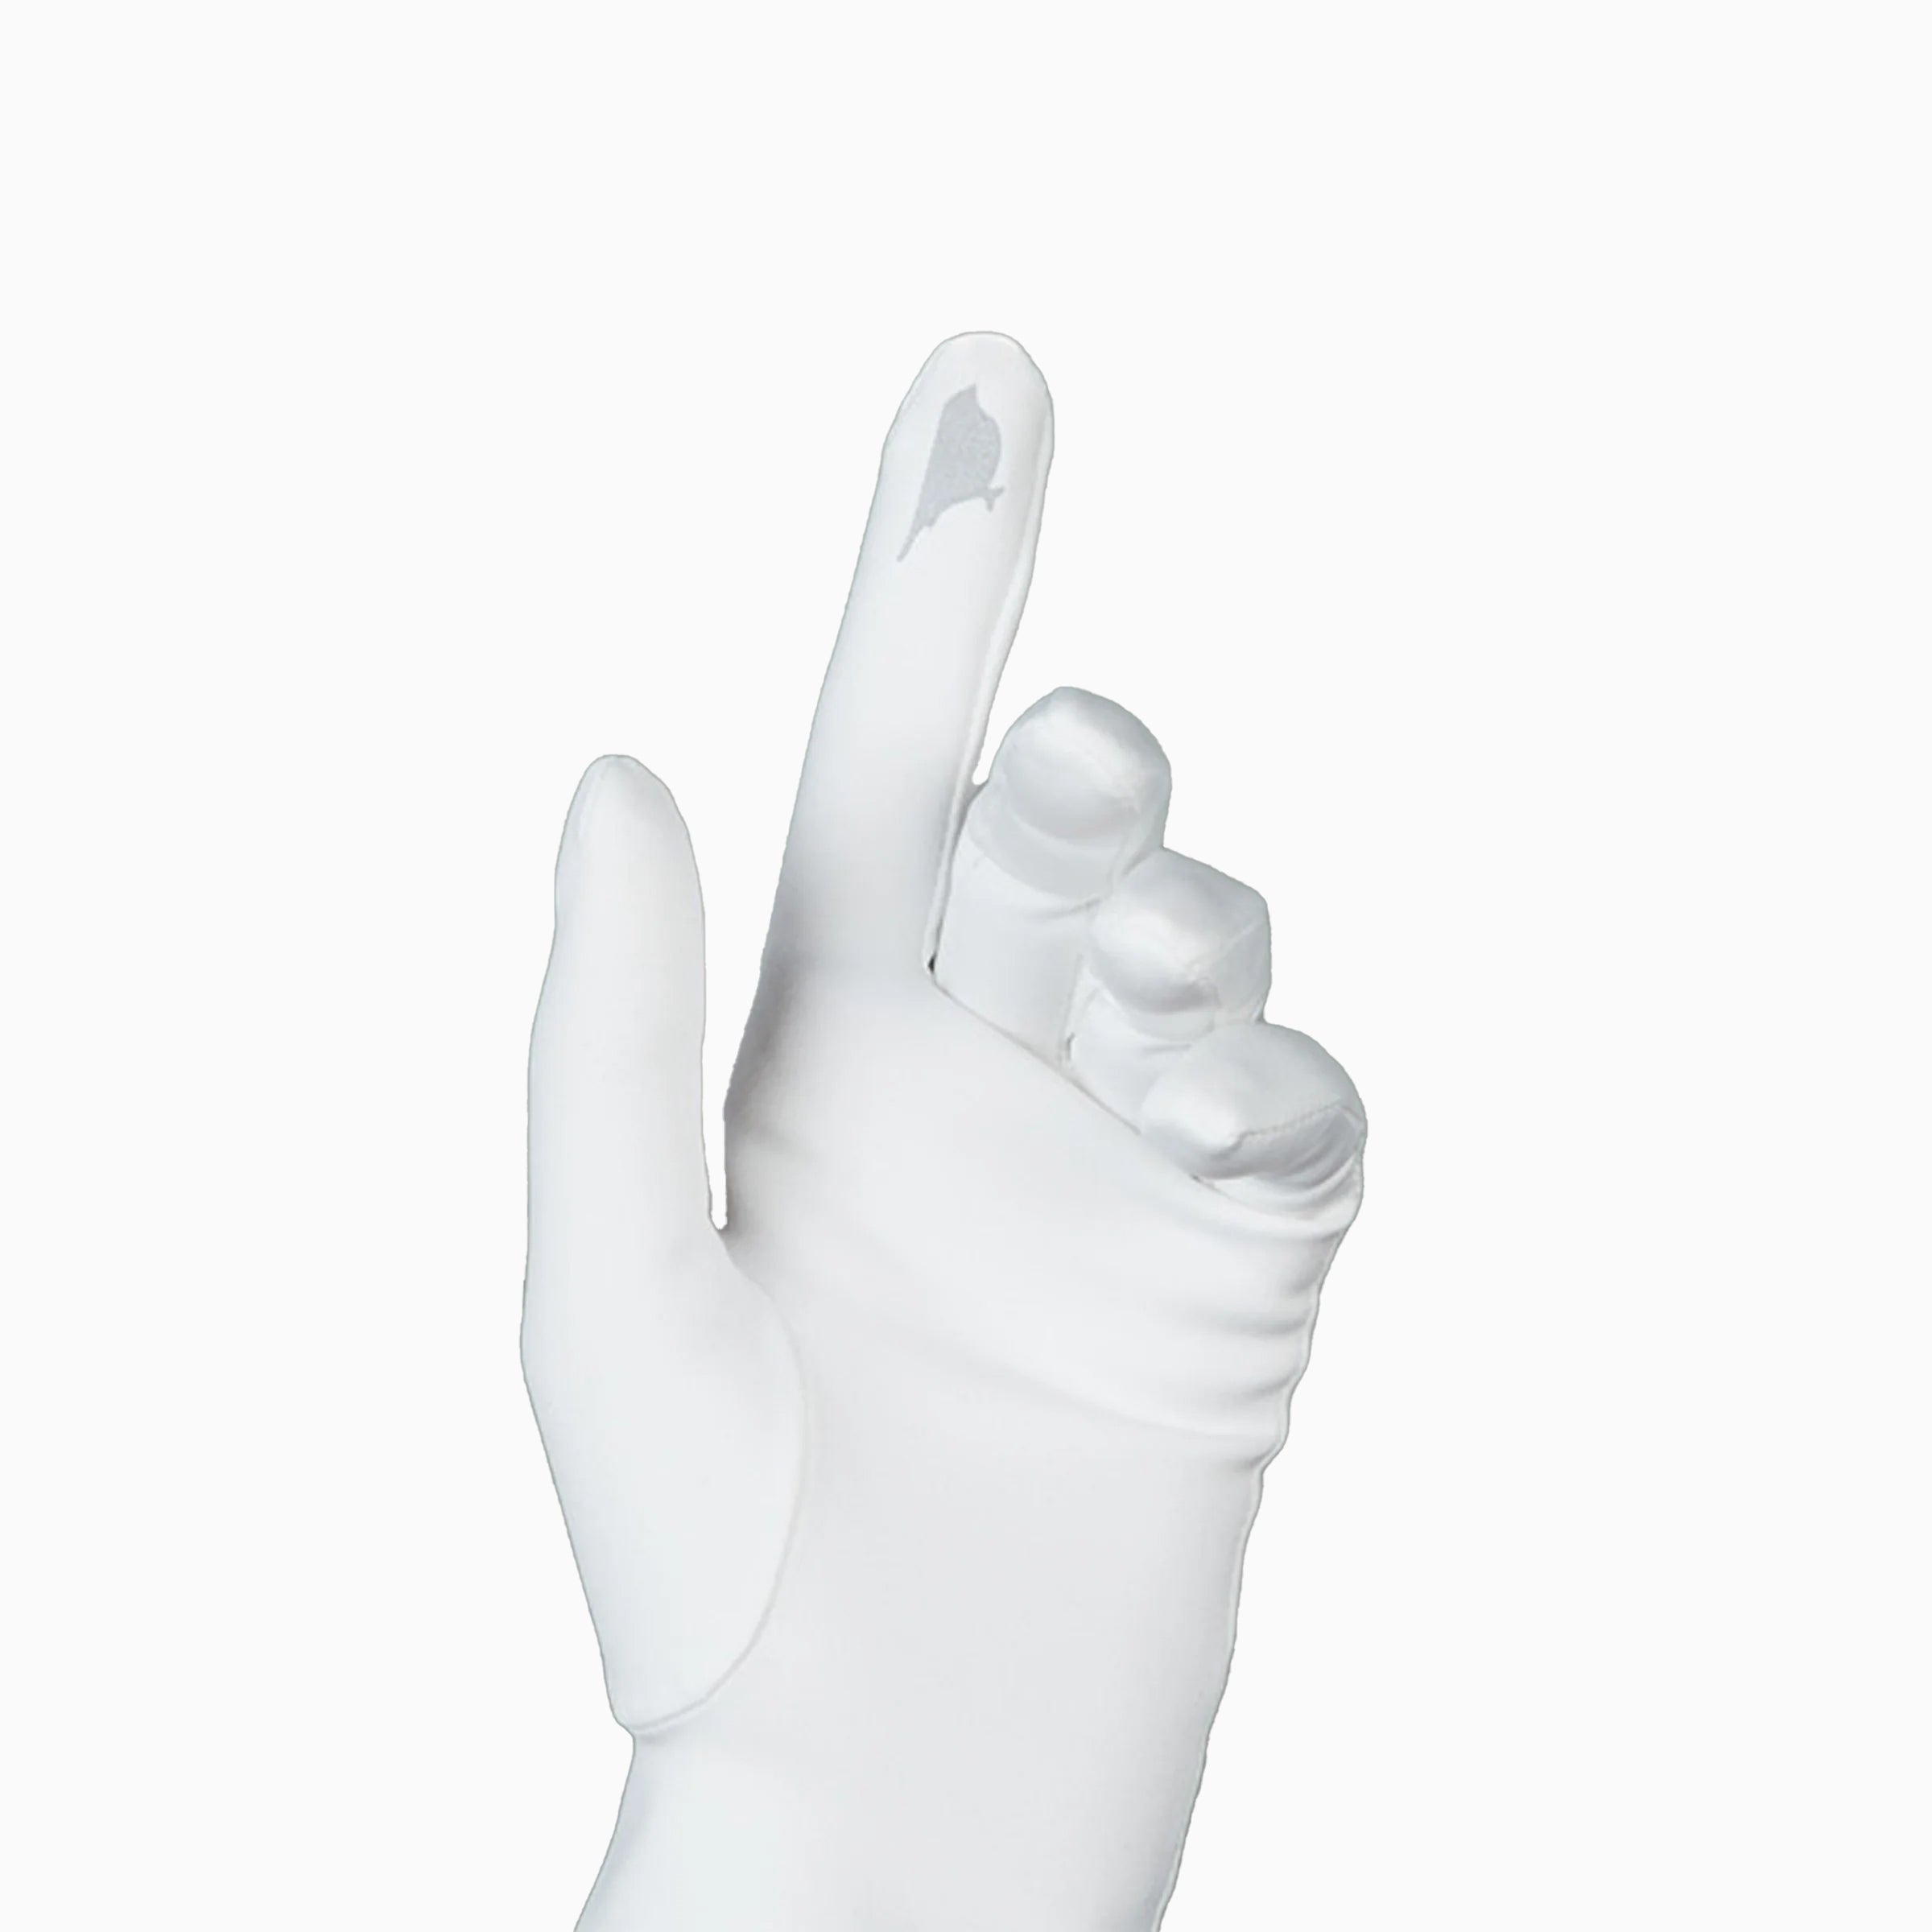 White women&#39;s glove against white background showing technology friendly index finger.